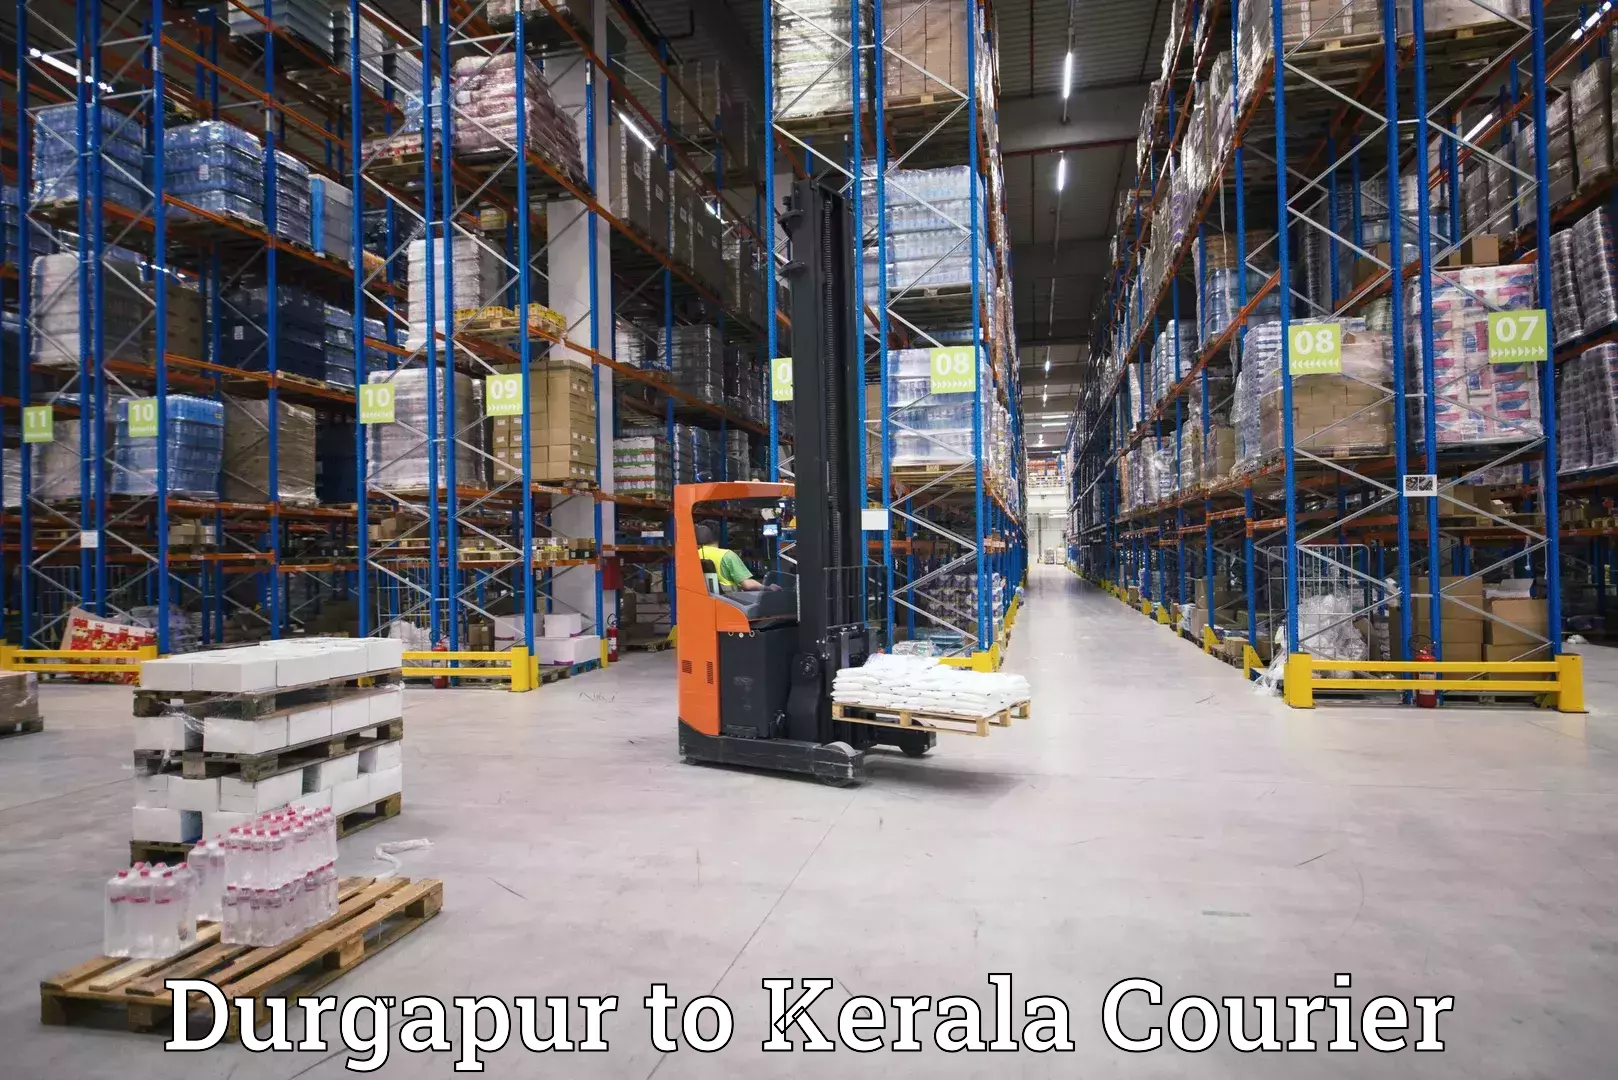 Nationwide delivery network Durgapur to Kerala